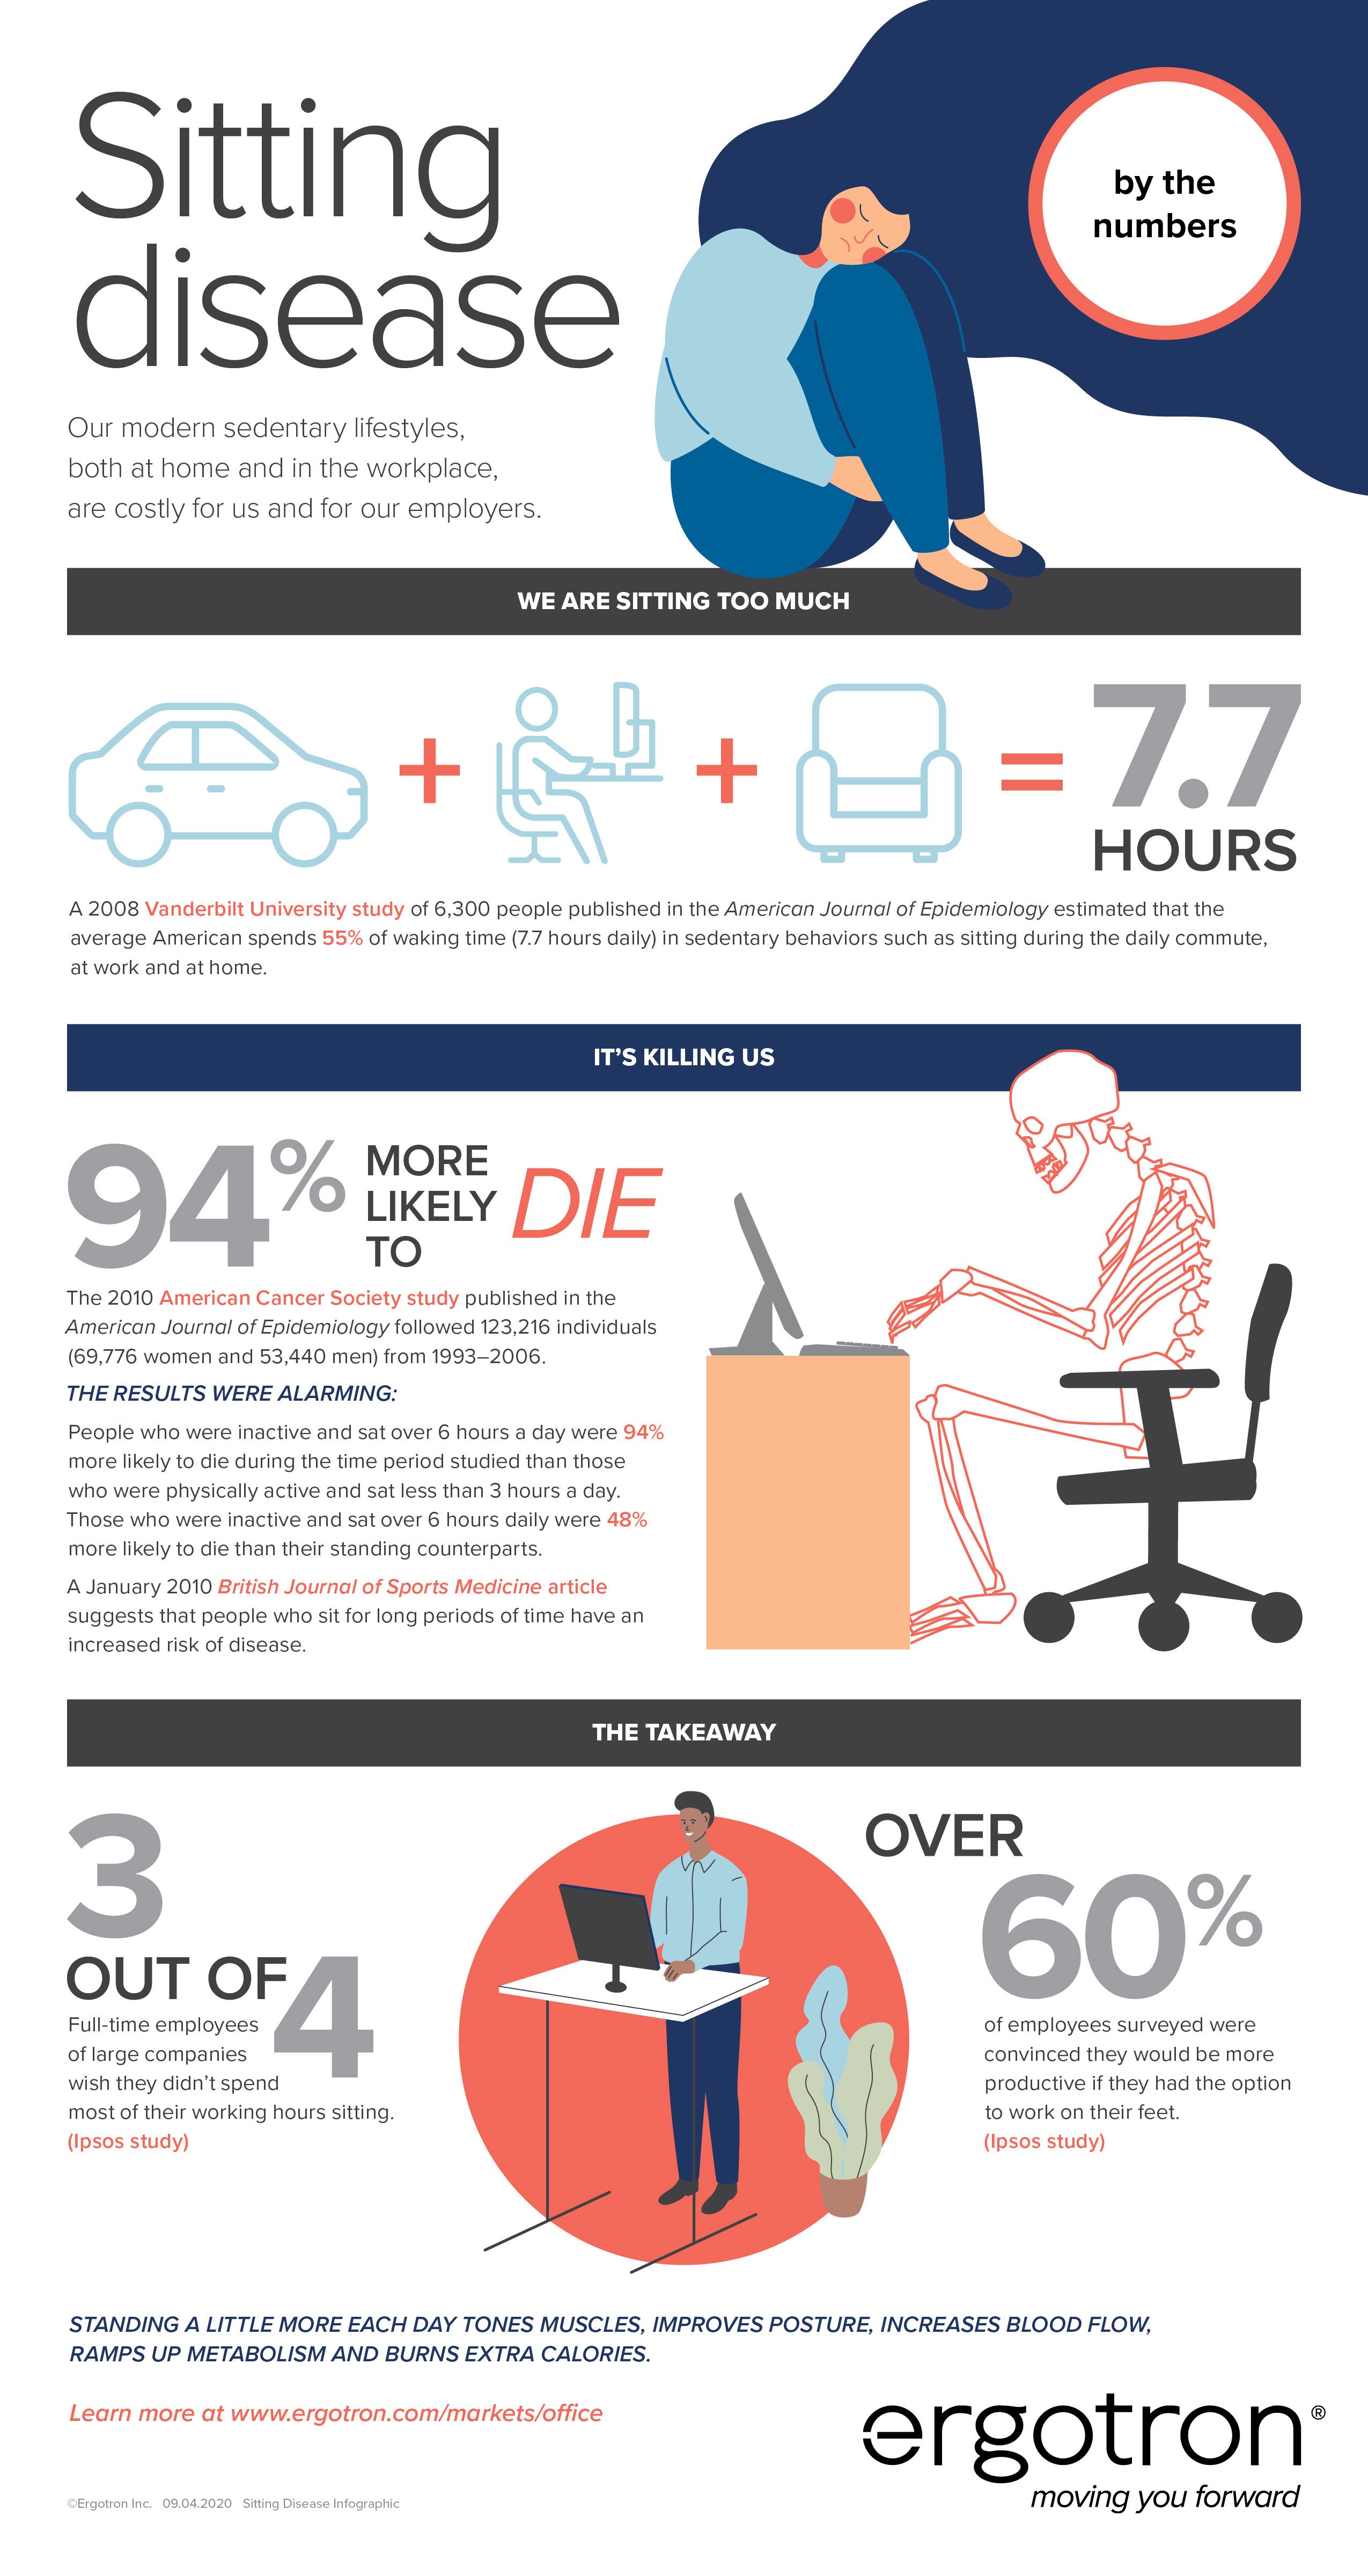 Sitting Disease by the Numbers infographic